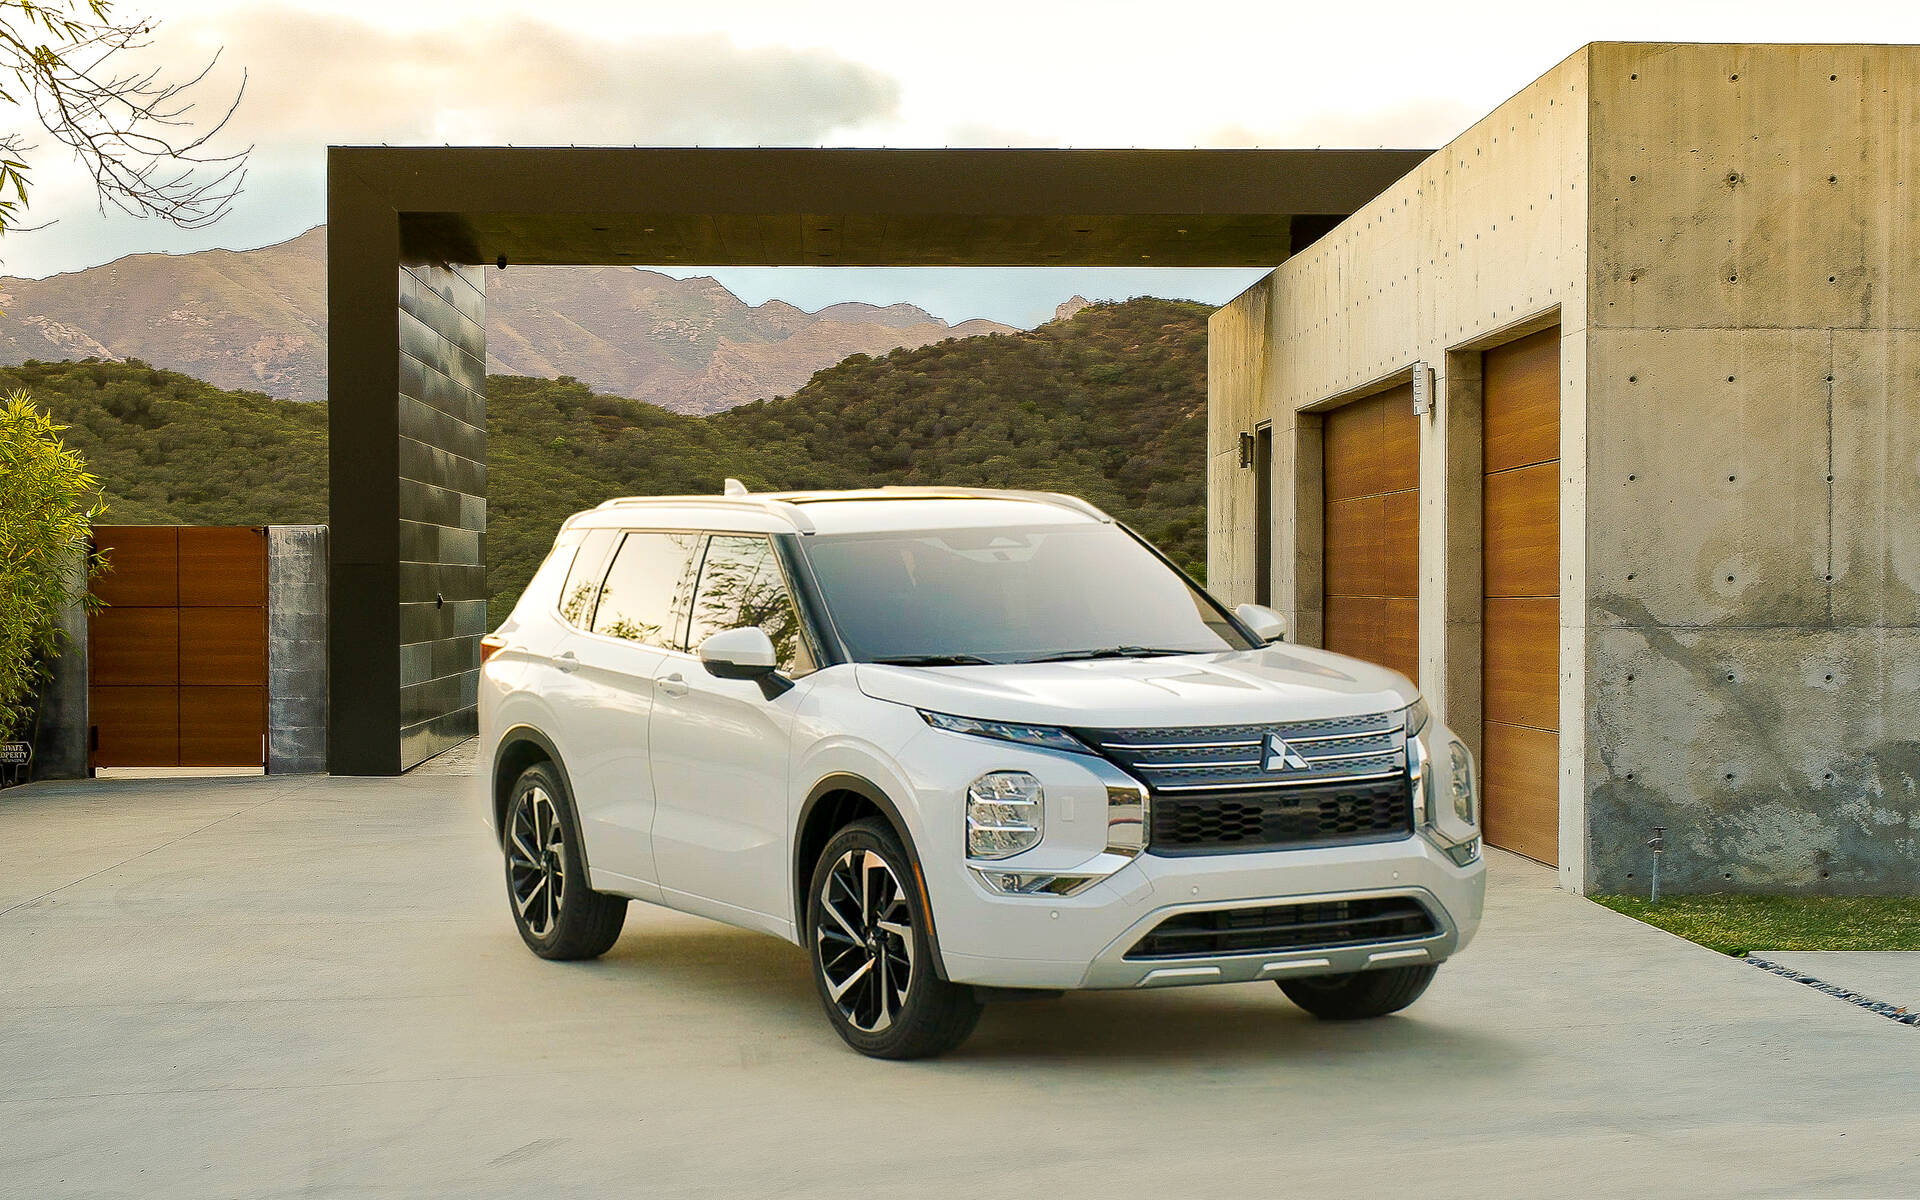 2022 Mitsubishi Outlander Undergoes Complete Transformation - The Car Guide